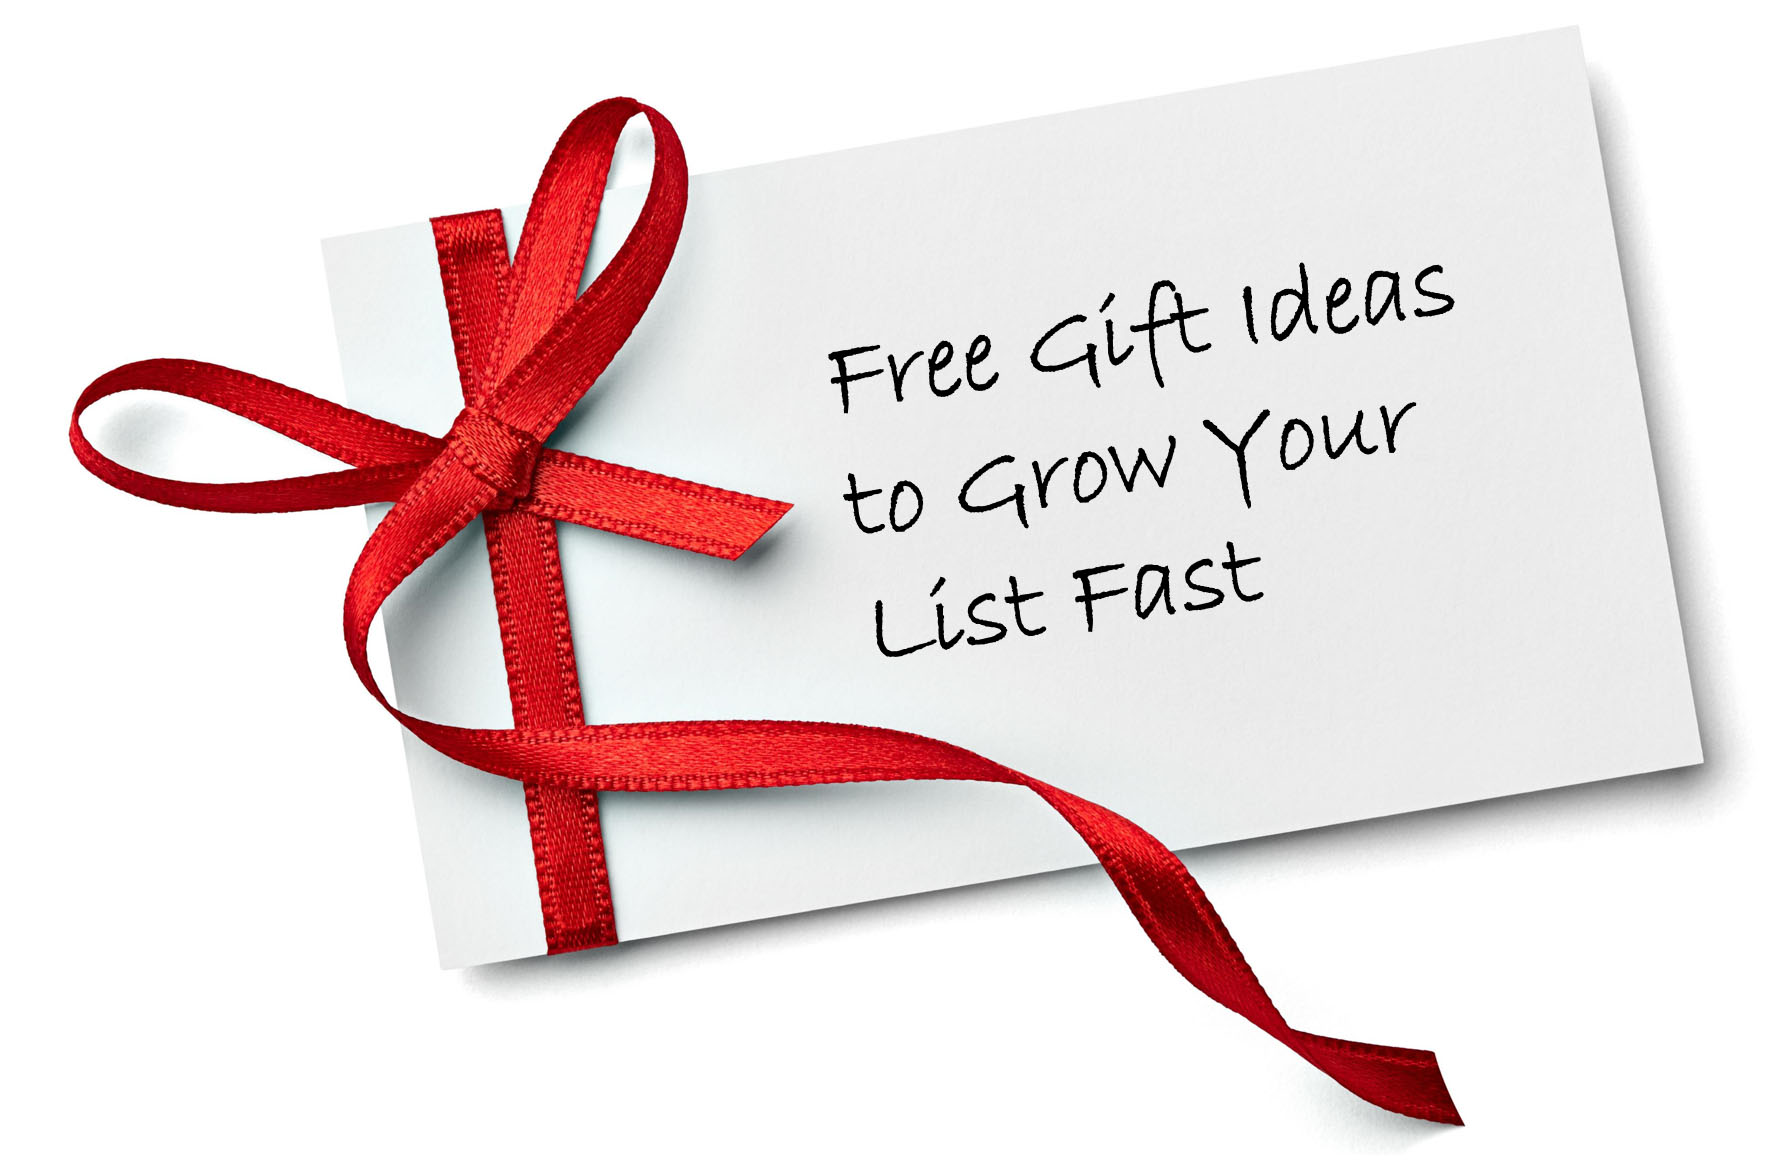 Free Gift Ideas to Grow Your List Fast